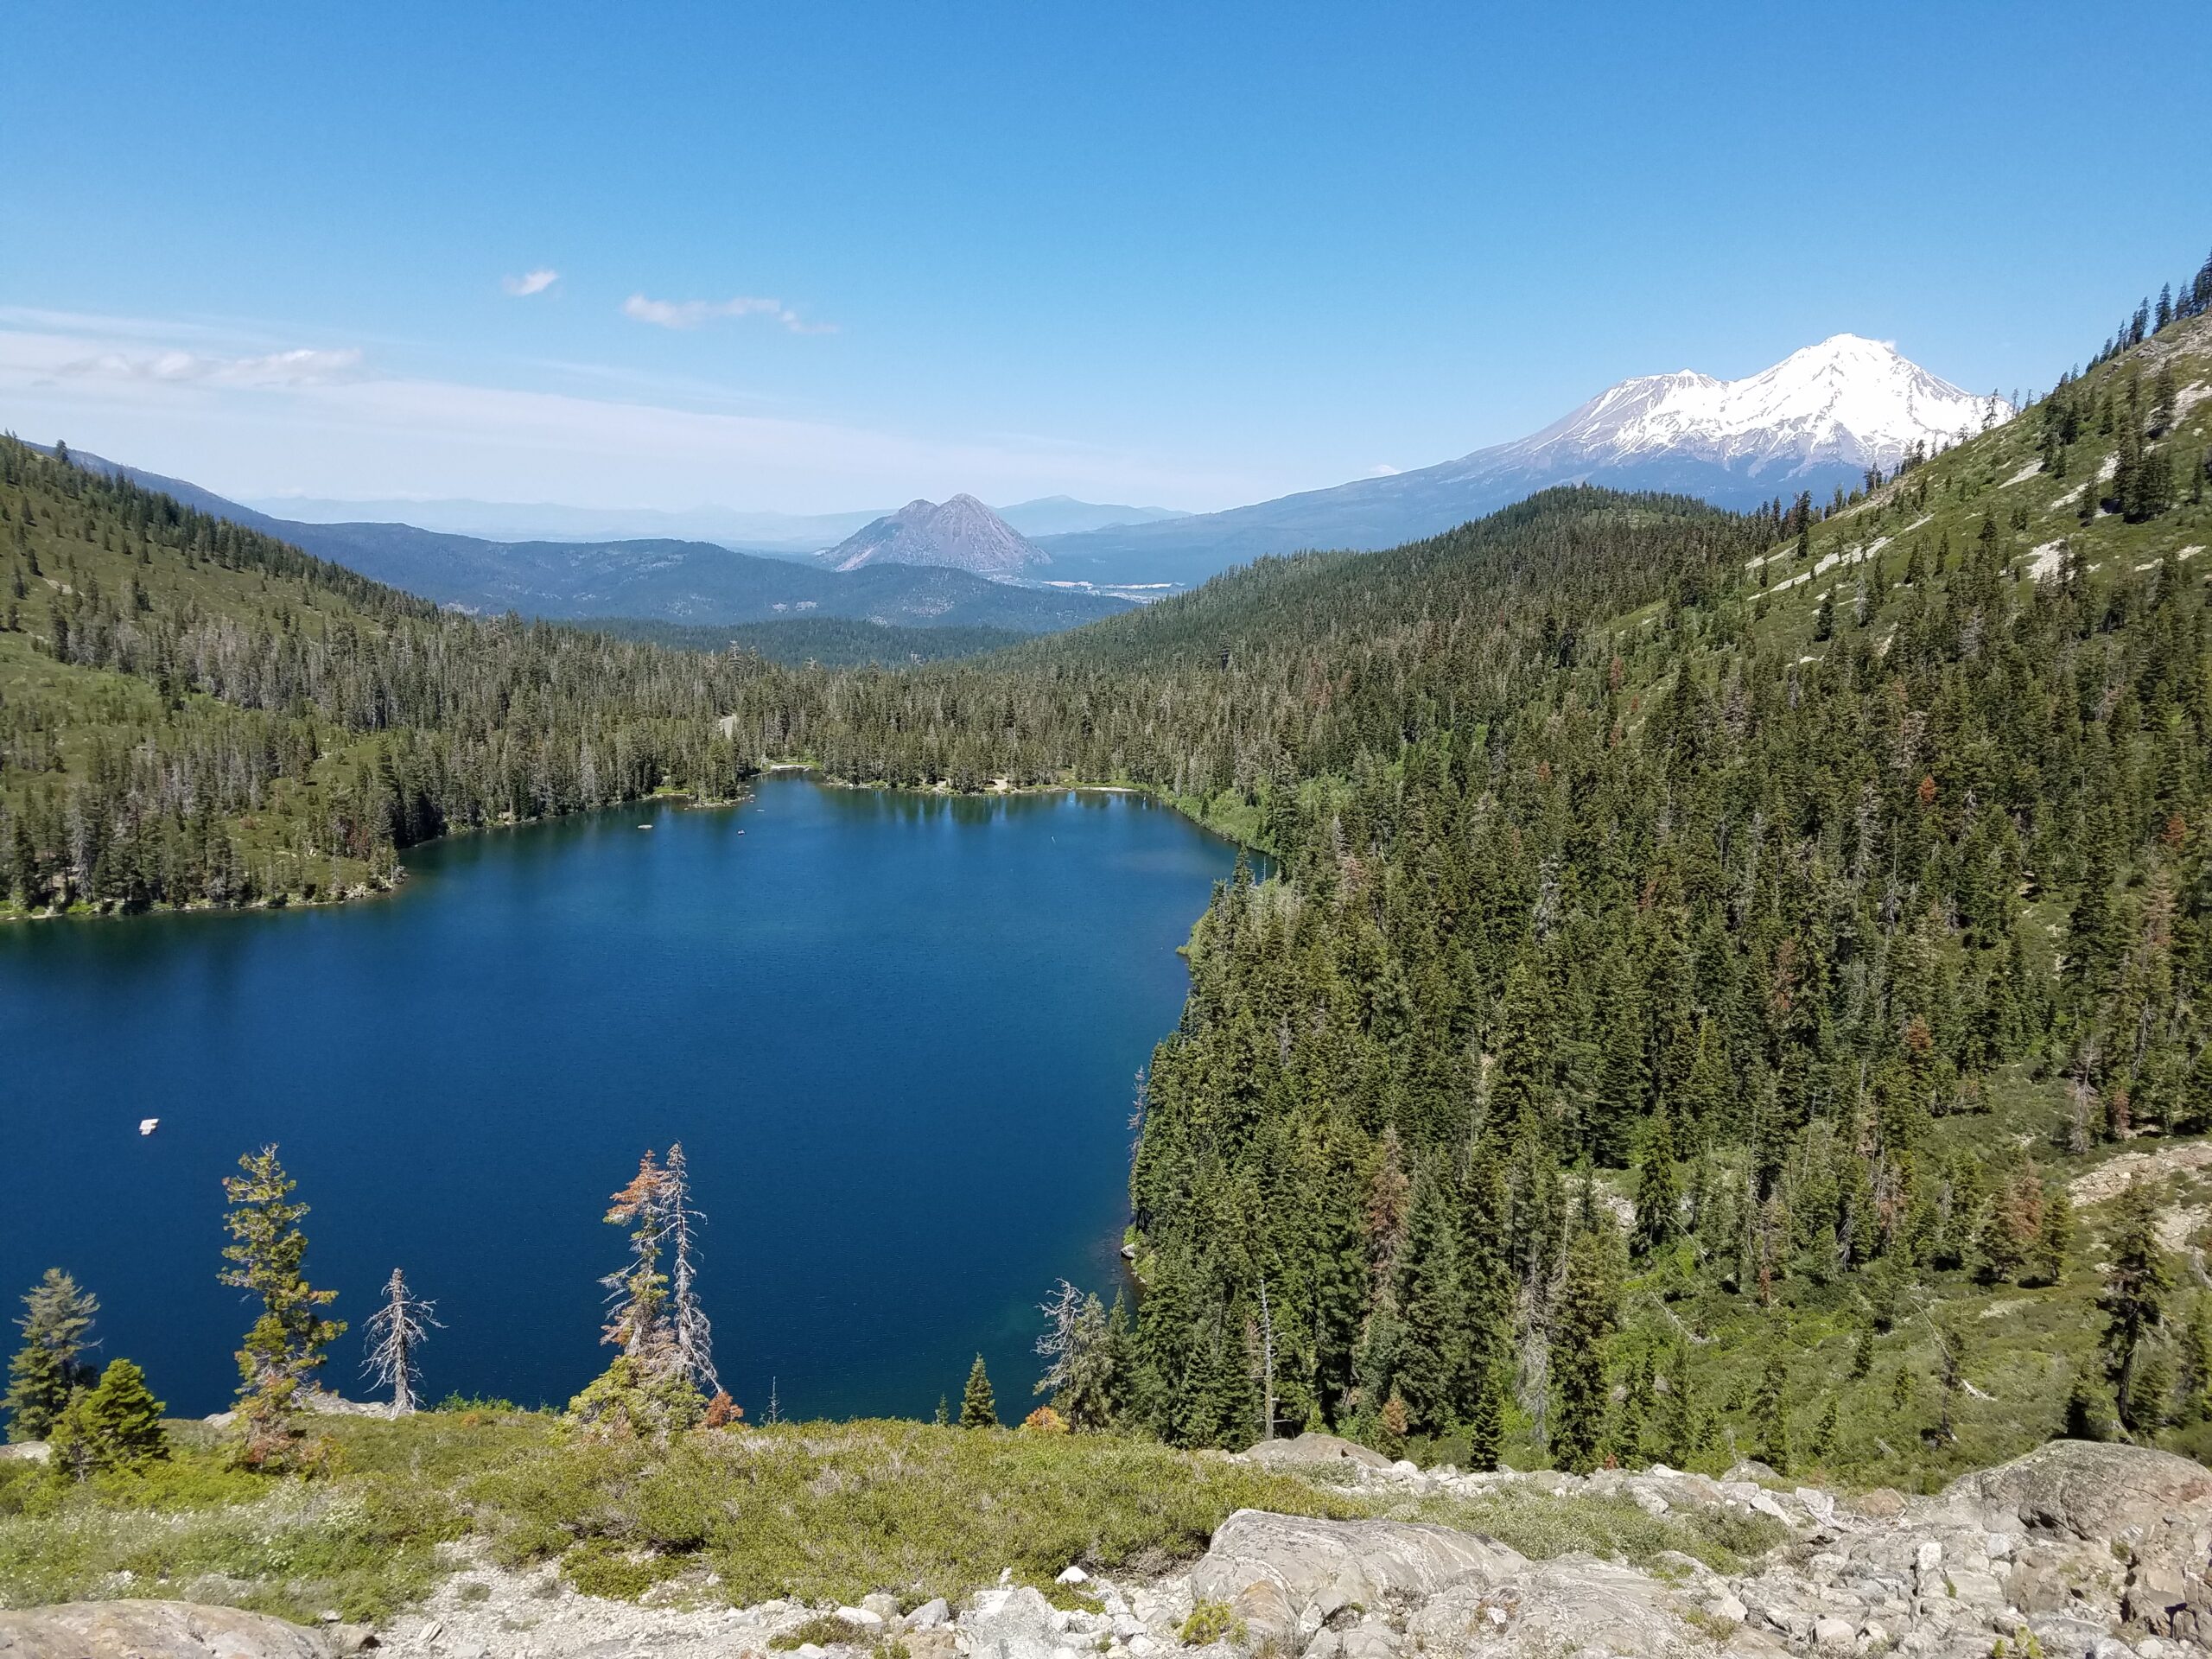 View of a Mt Shasta nearby lake